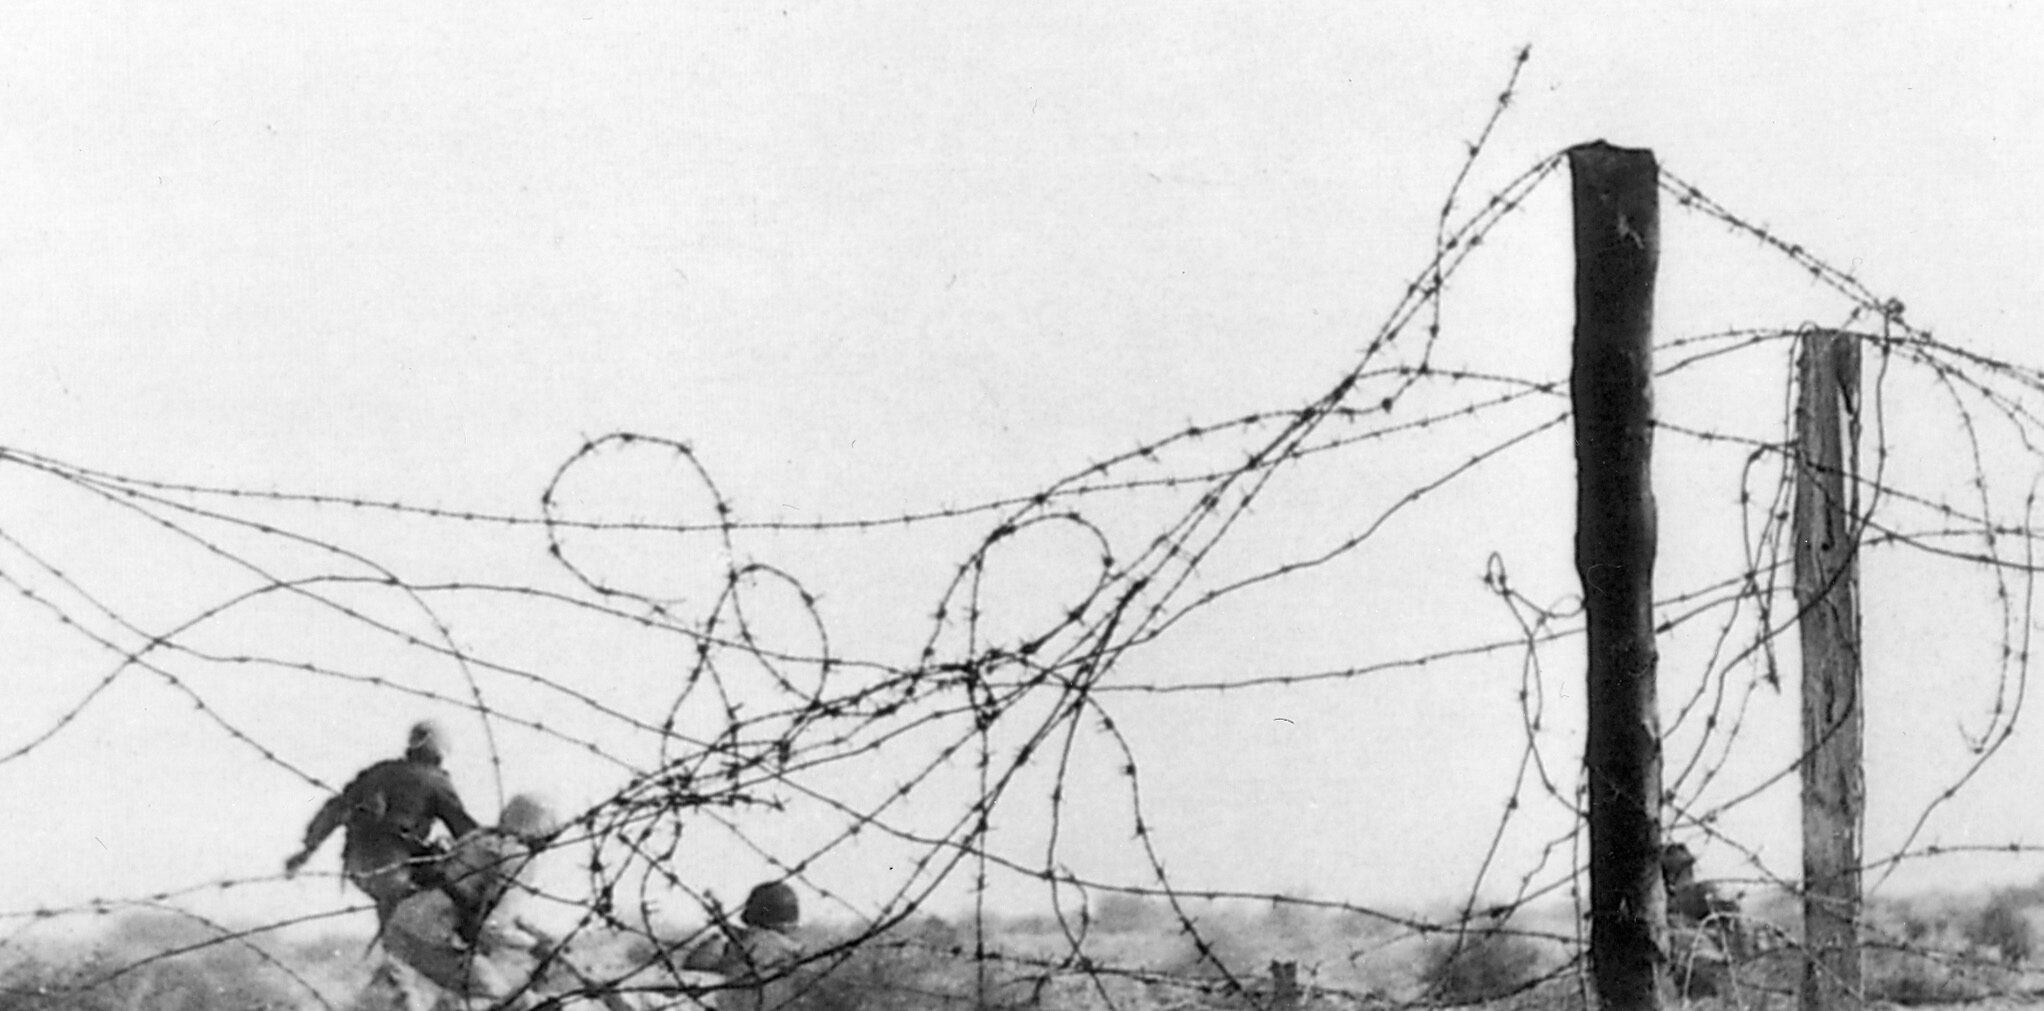 Advancing on Tobruk, German soldiers move through a tangle of barbed wire.